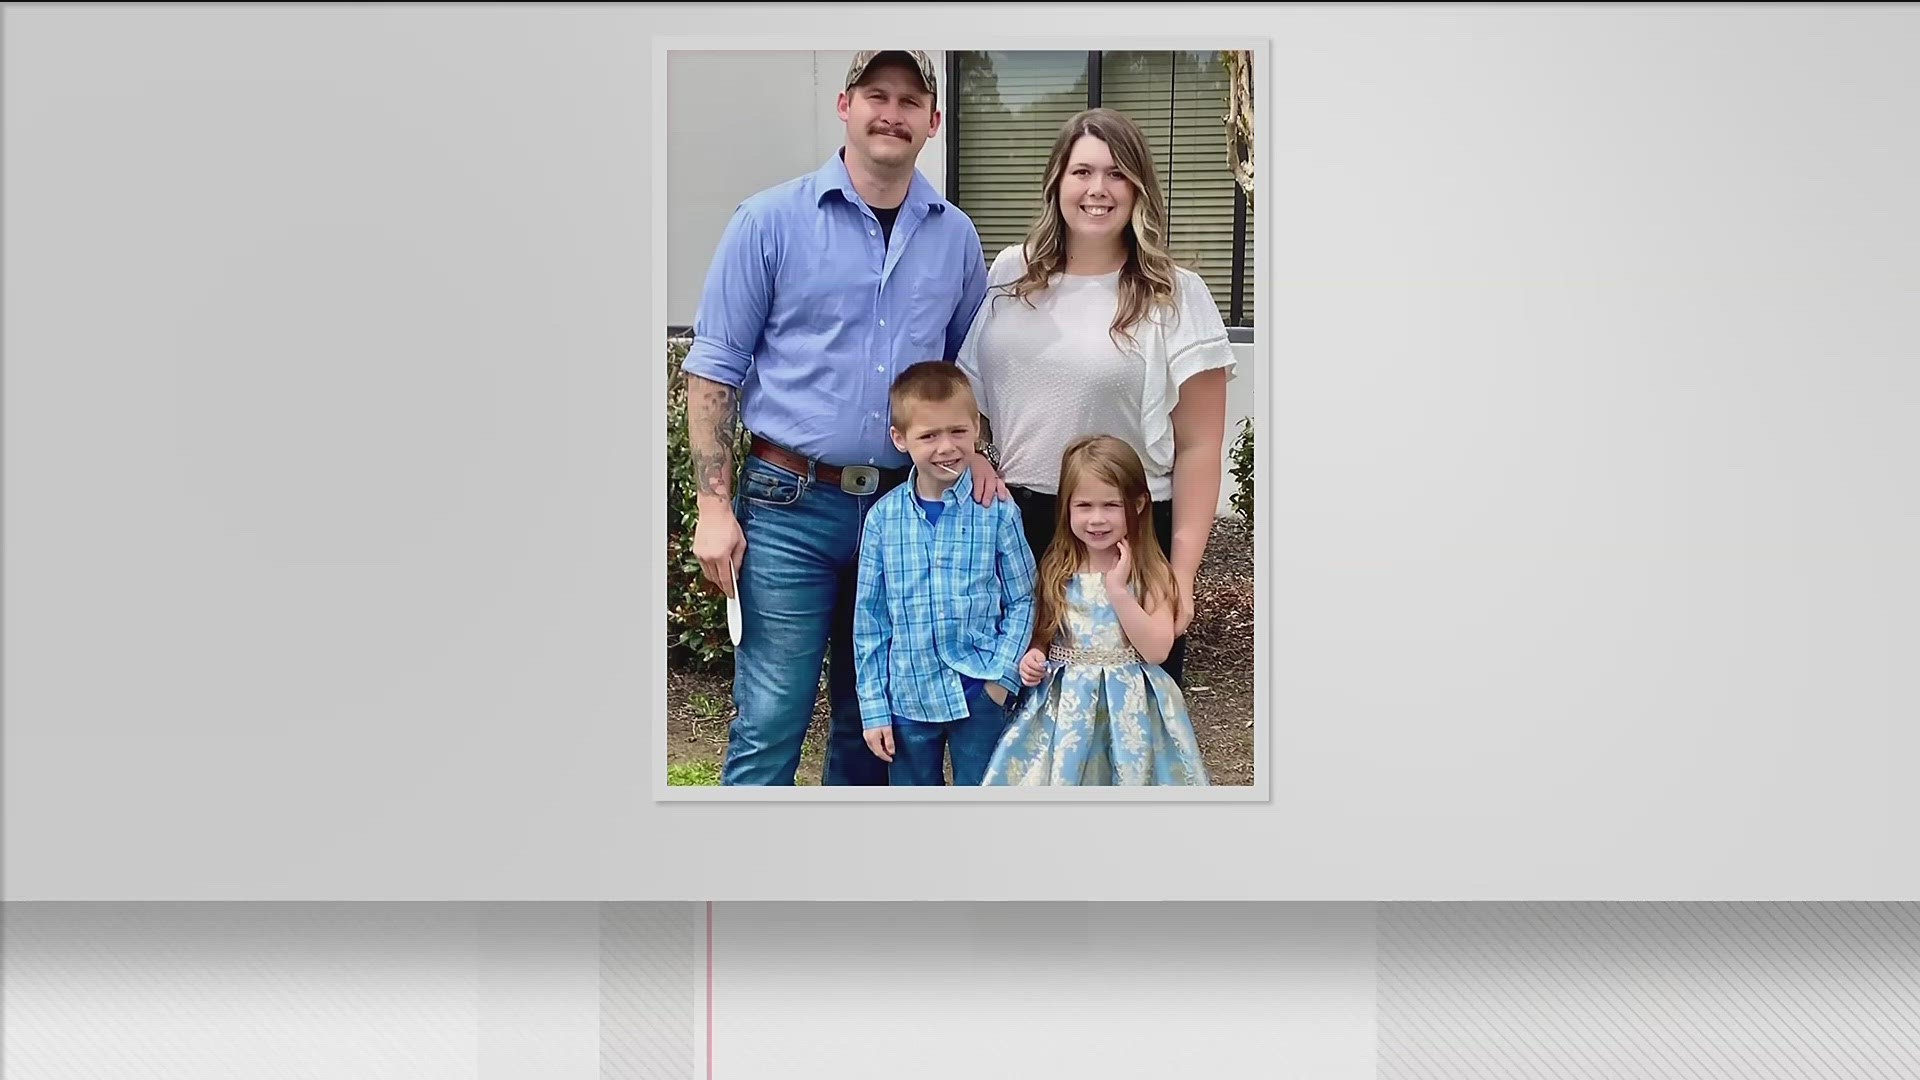 Hall County Deputy Patrick Neil Holtzclaw is mourning the loss of his 29-year-old wife and two children.